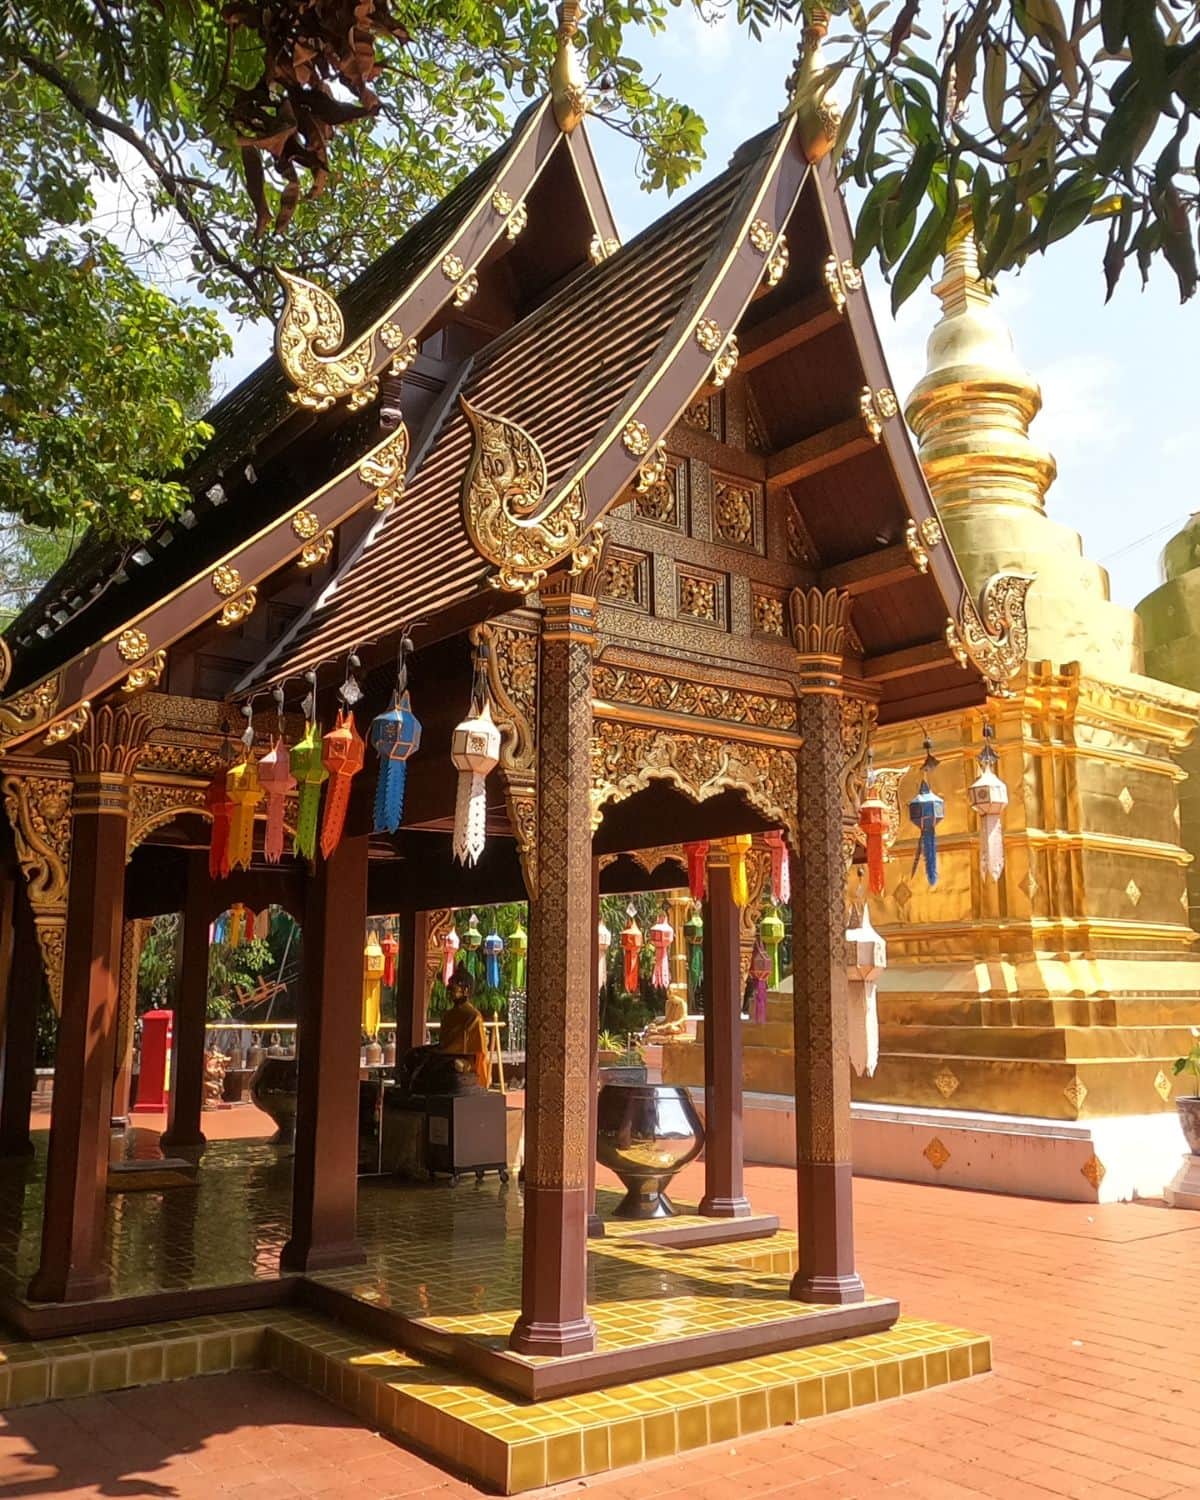 Wood shrine decorated with gold ornaments in front of a gold chedi in Wat Phra Singh, the most beautiful temples in Chiang Mai.